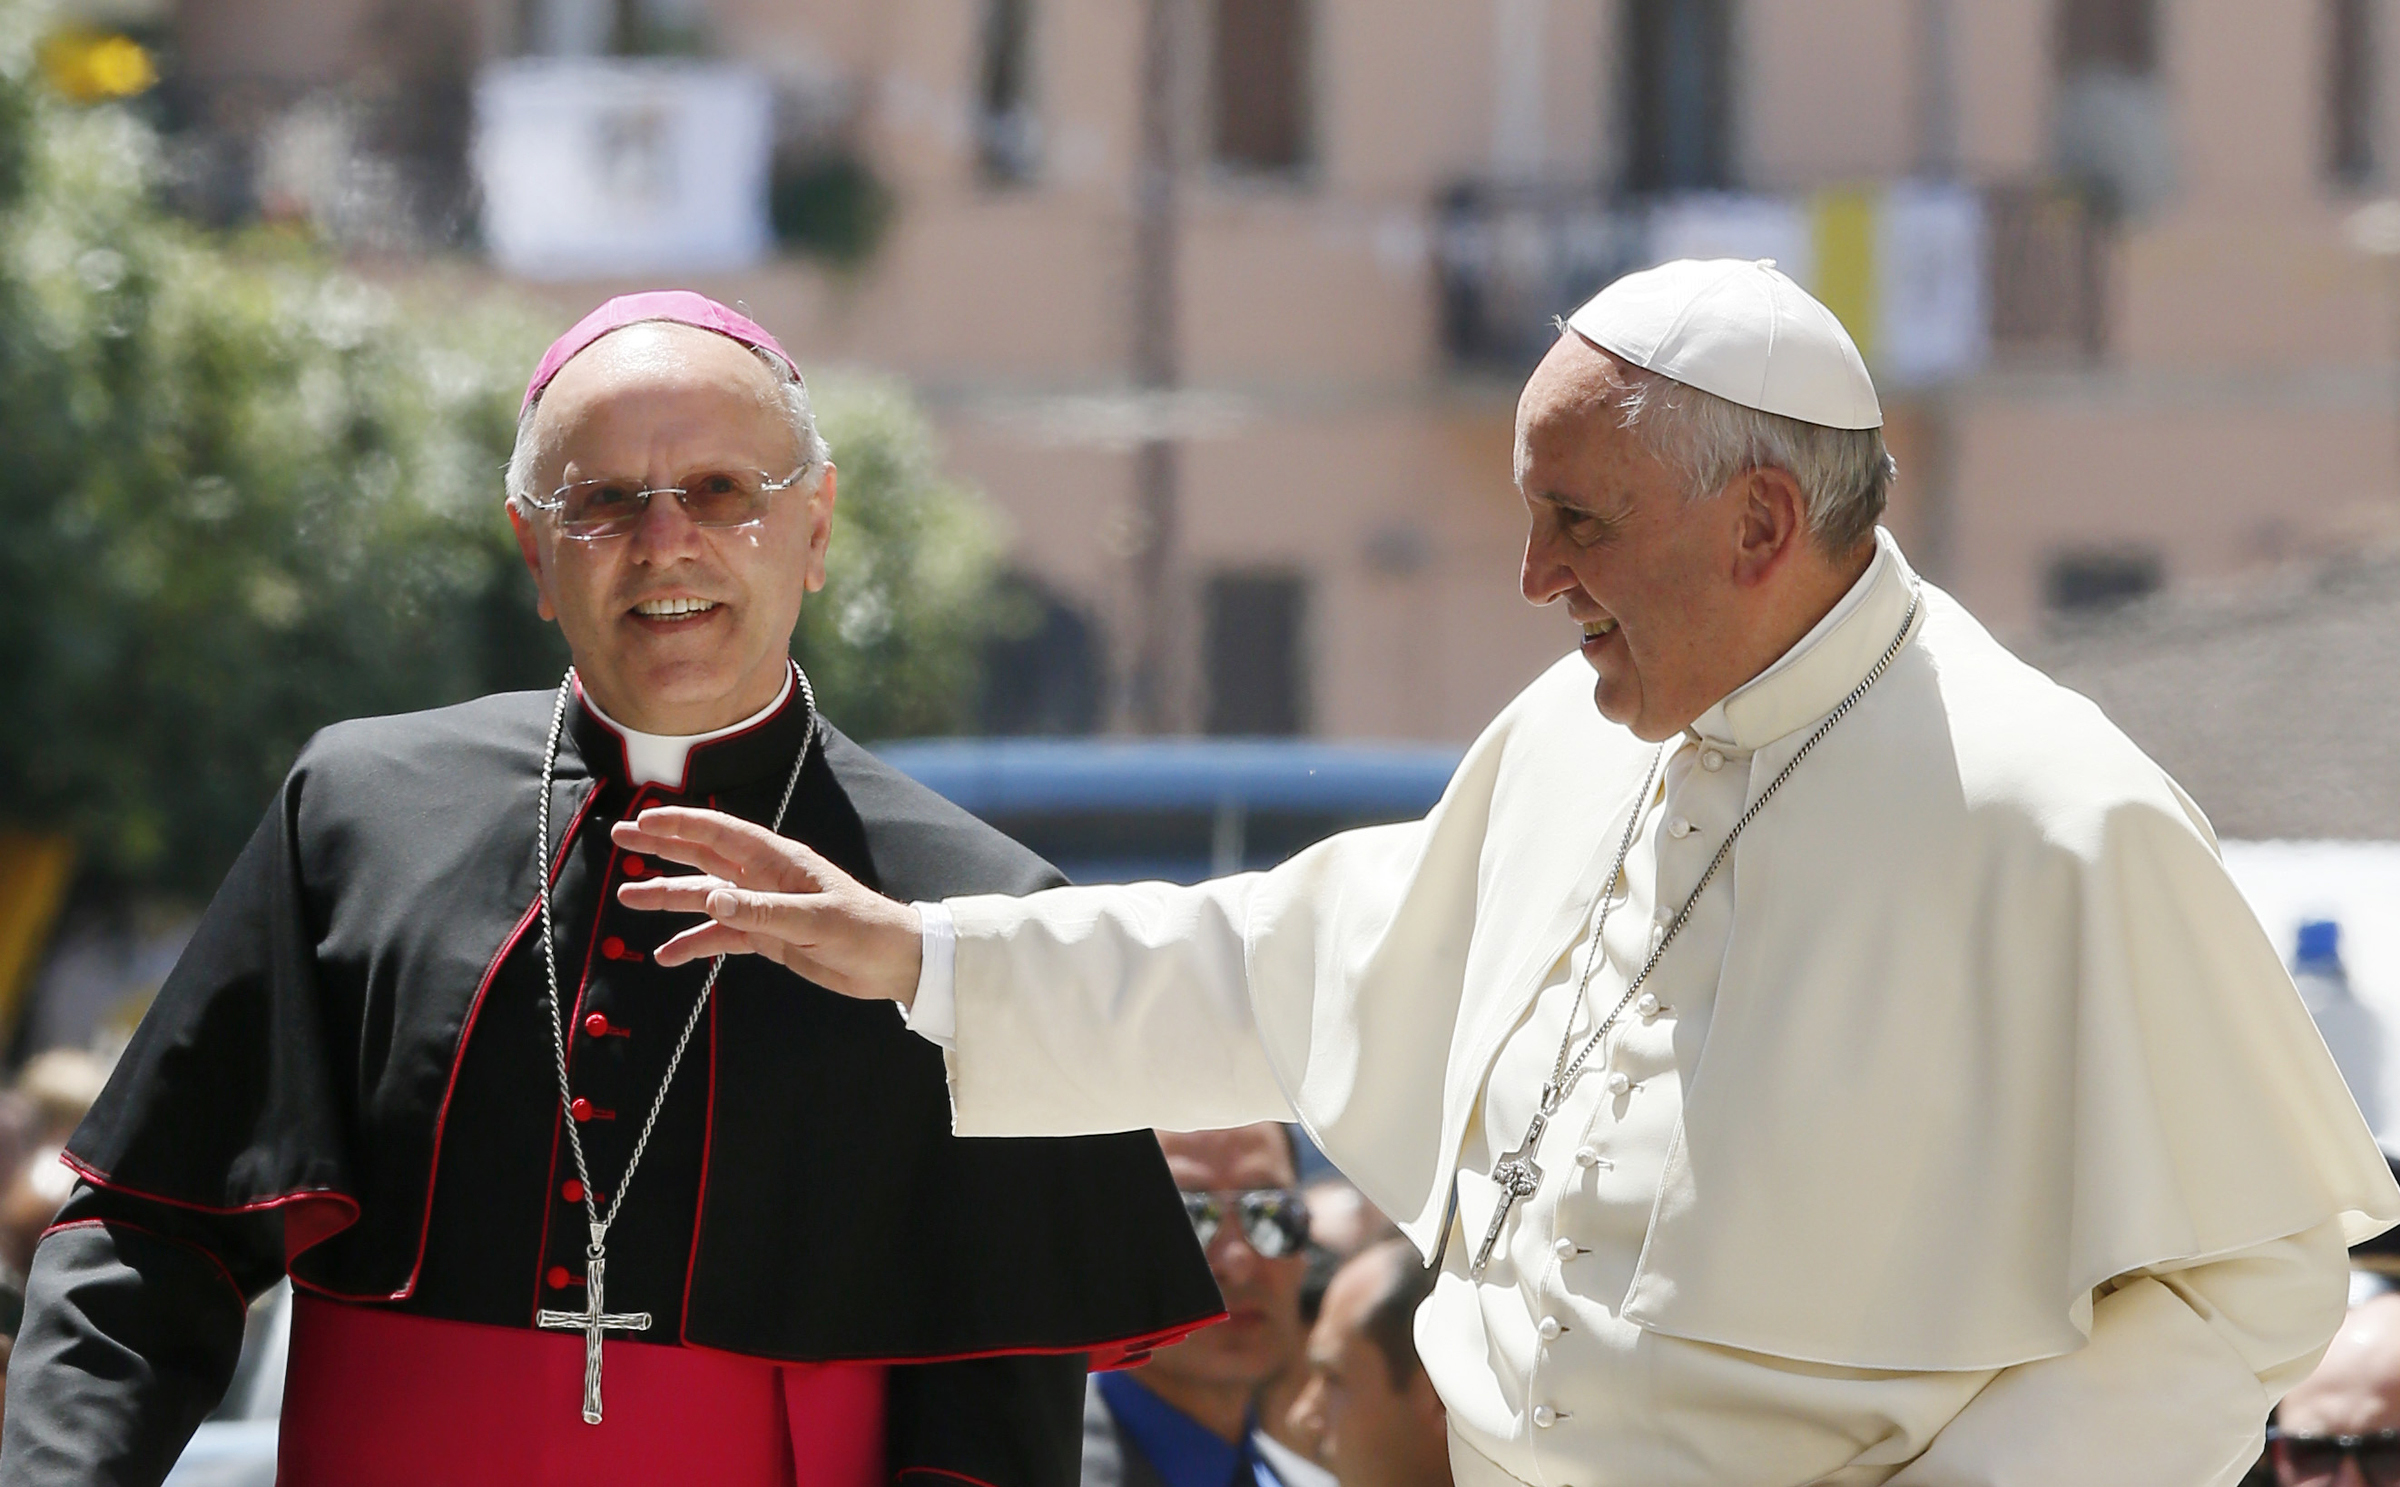 Bishop Nunzio Galantino, left, and Pope Francis at Cassano allo Ionio, in Italy's Calabria region, June 21, 2014. Photo by Paul Haring, courtesy of Catholic New Service